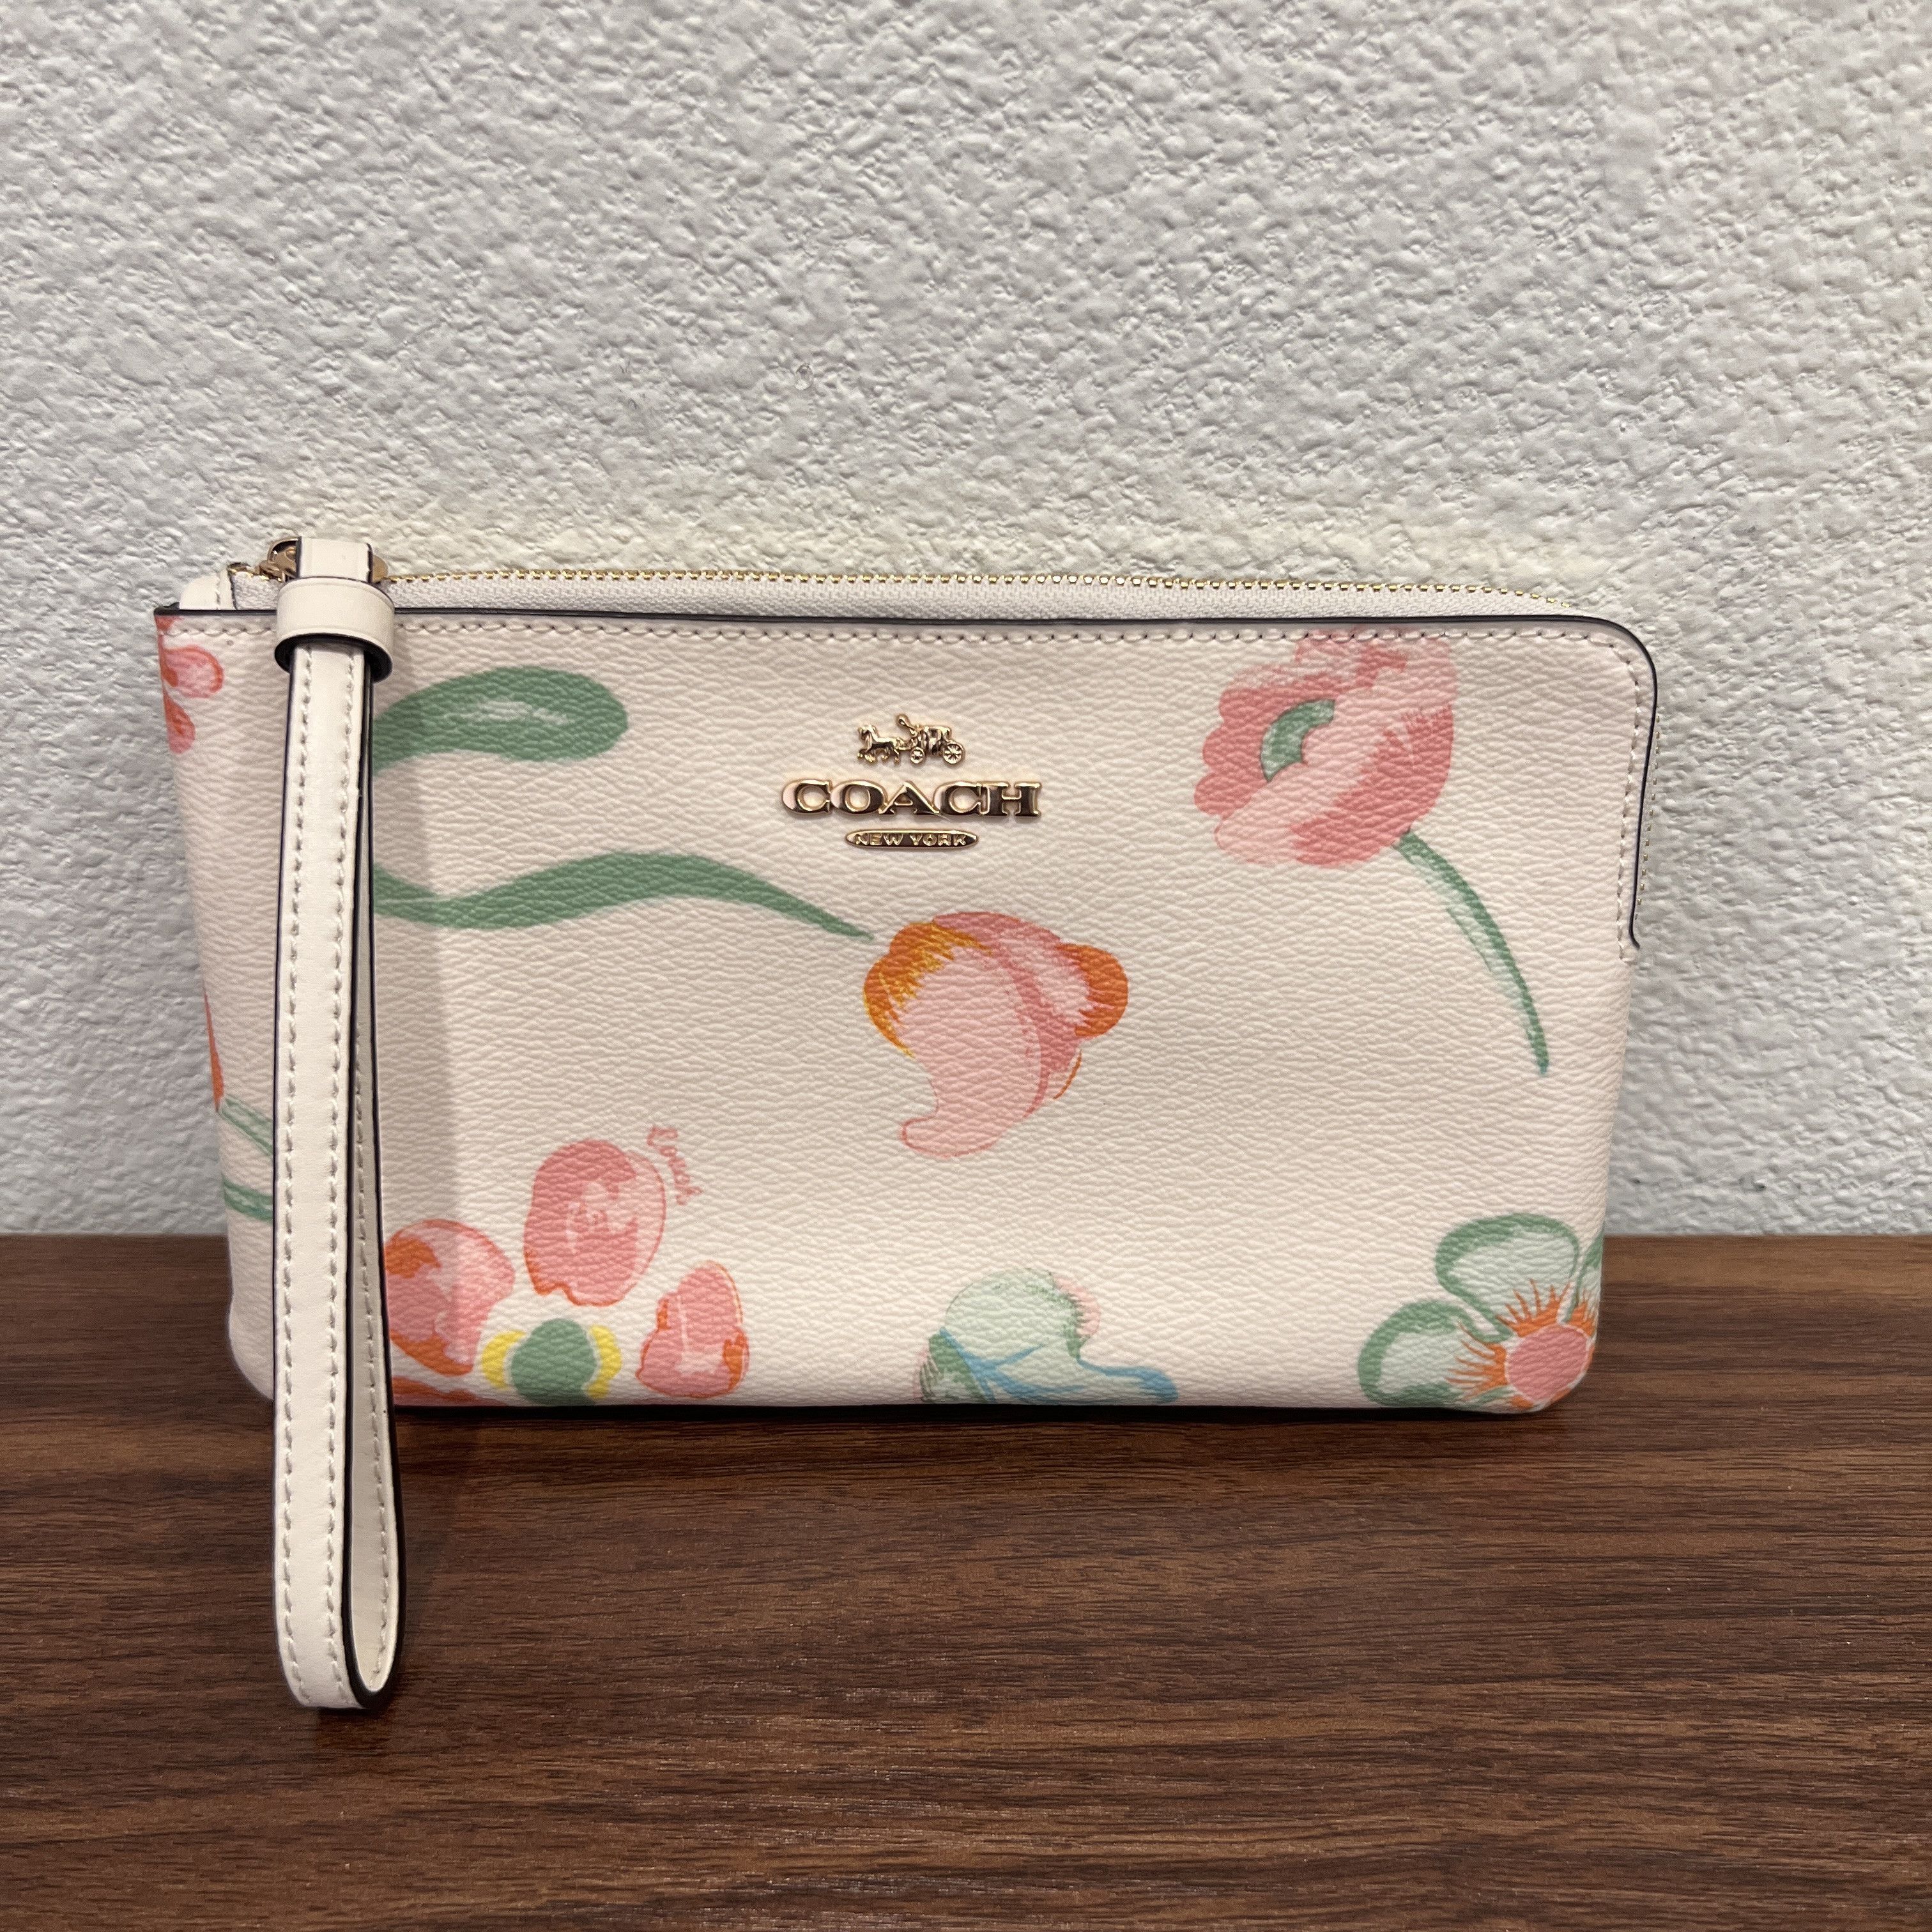 Coach Large Corner Zip Wristlet with Floral Embroidery